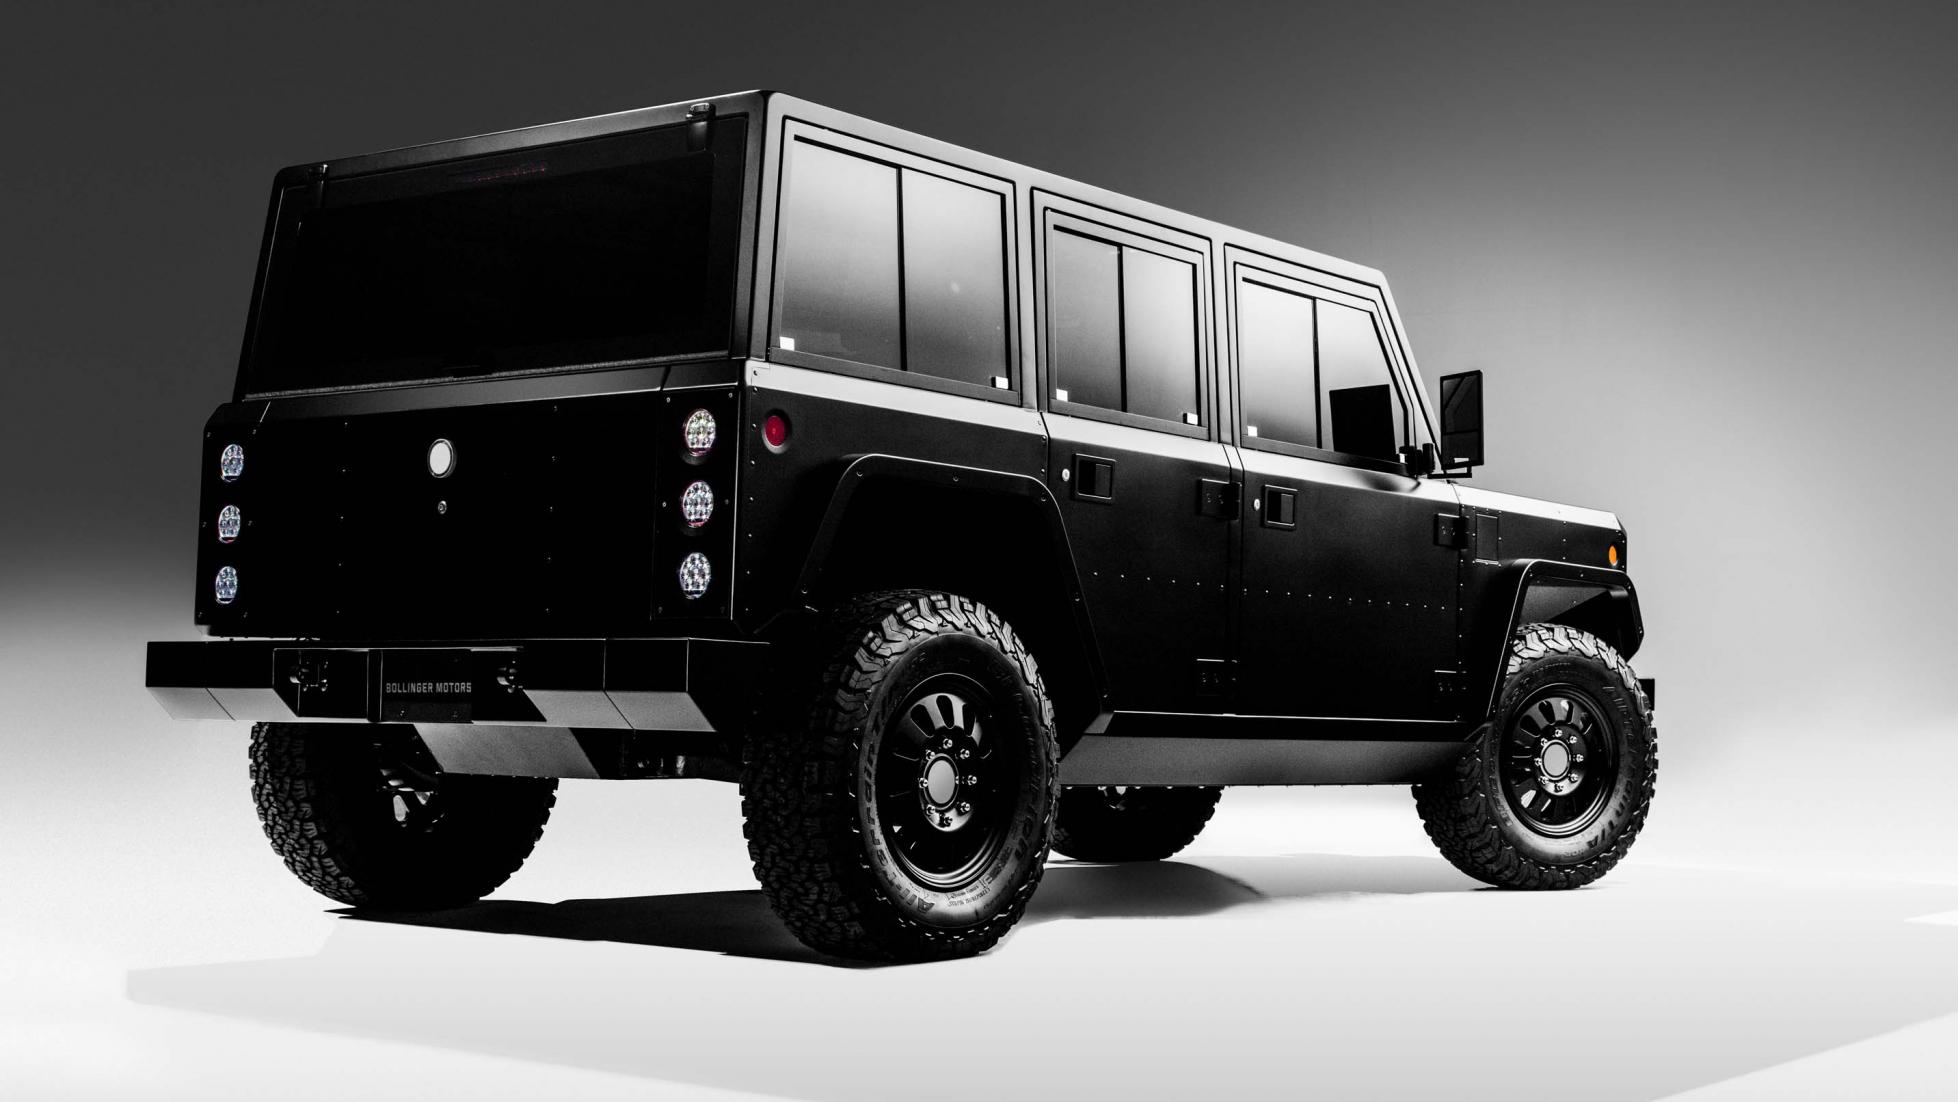 Bollinger has announced its electric 4x4s will have 606bhp